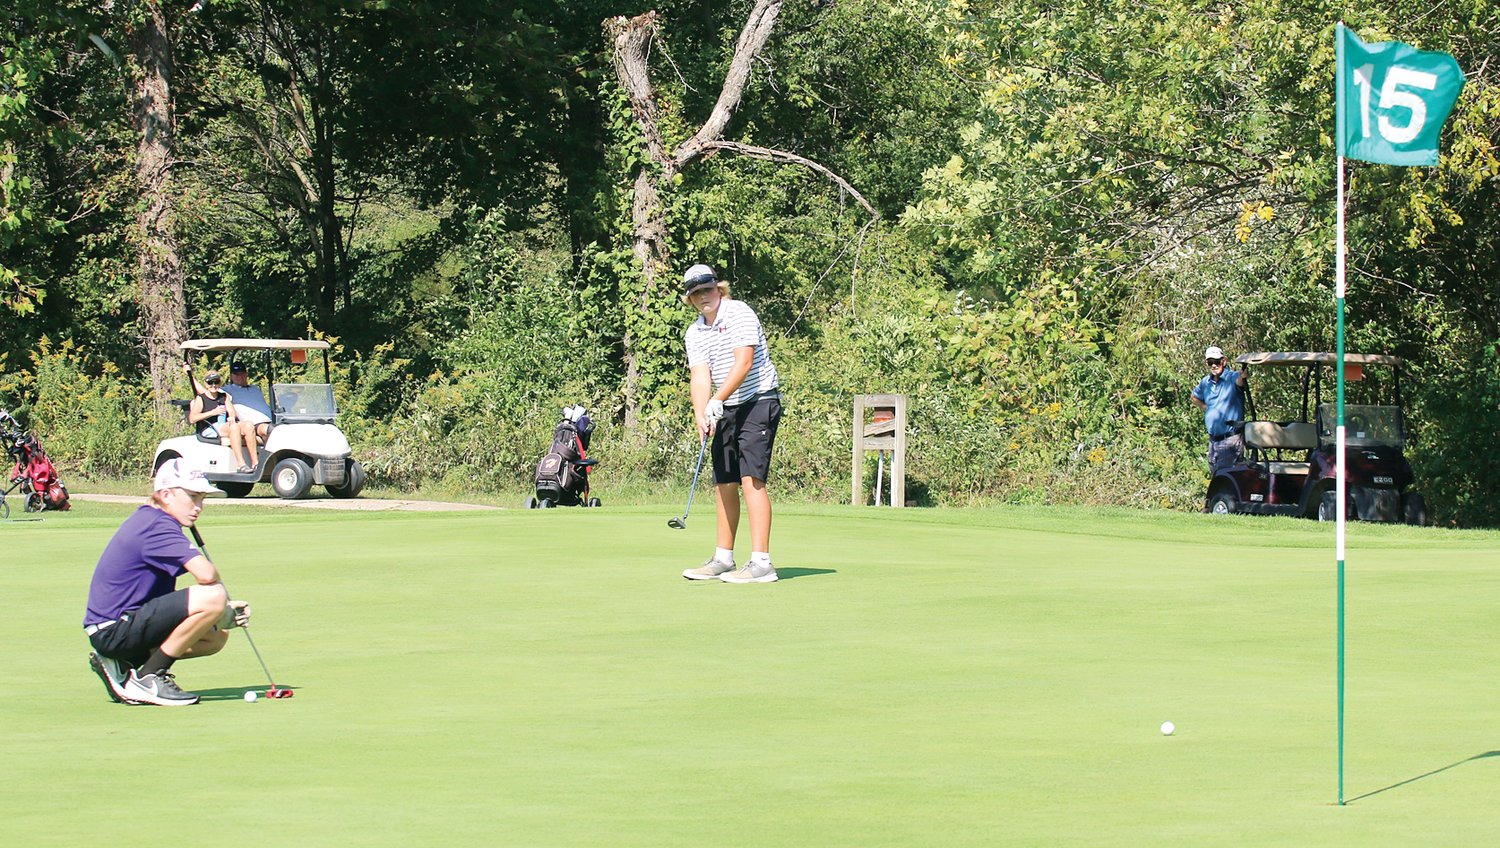 Litchfield's Brawly Jacobs watches as Tycen Thacker's putt rolls toward the hole on the 15th green at Indian Springs on Monday, Sept. 27. Thacker's Hillsboro Hilltoppers edged Jacobs' Purple Panthers for second at the South Central Conference Tournament, shooting a 327 to the Panthers' 328